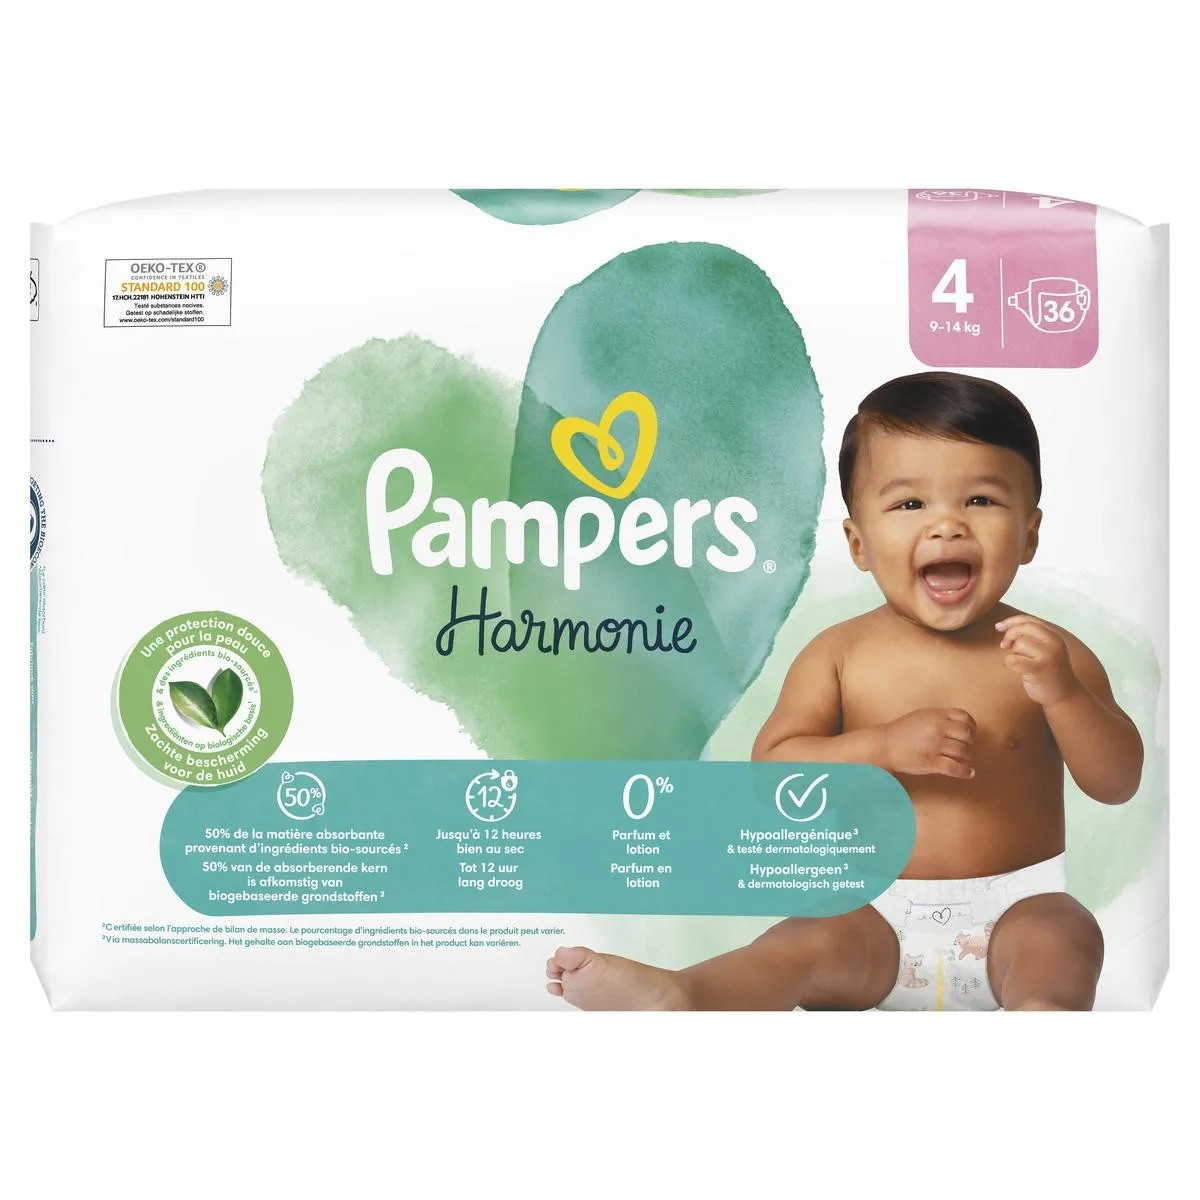 Acheter Promotion Pampers Harmonie Couches T3 6 -10 kg, 42 couches